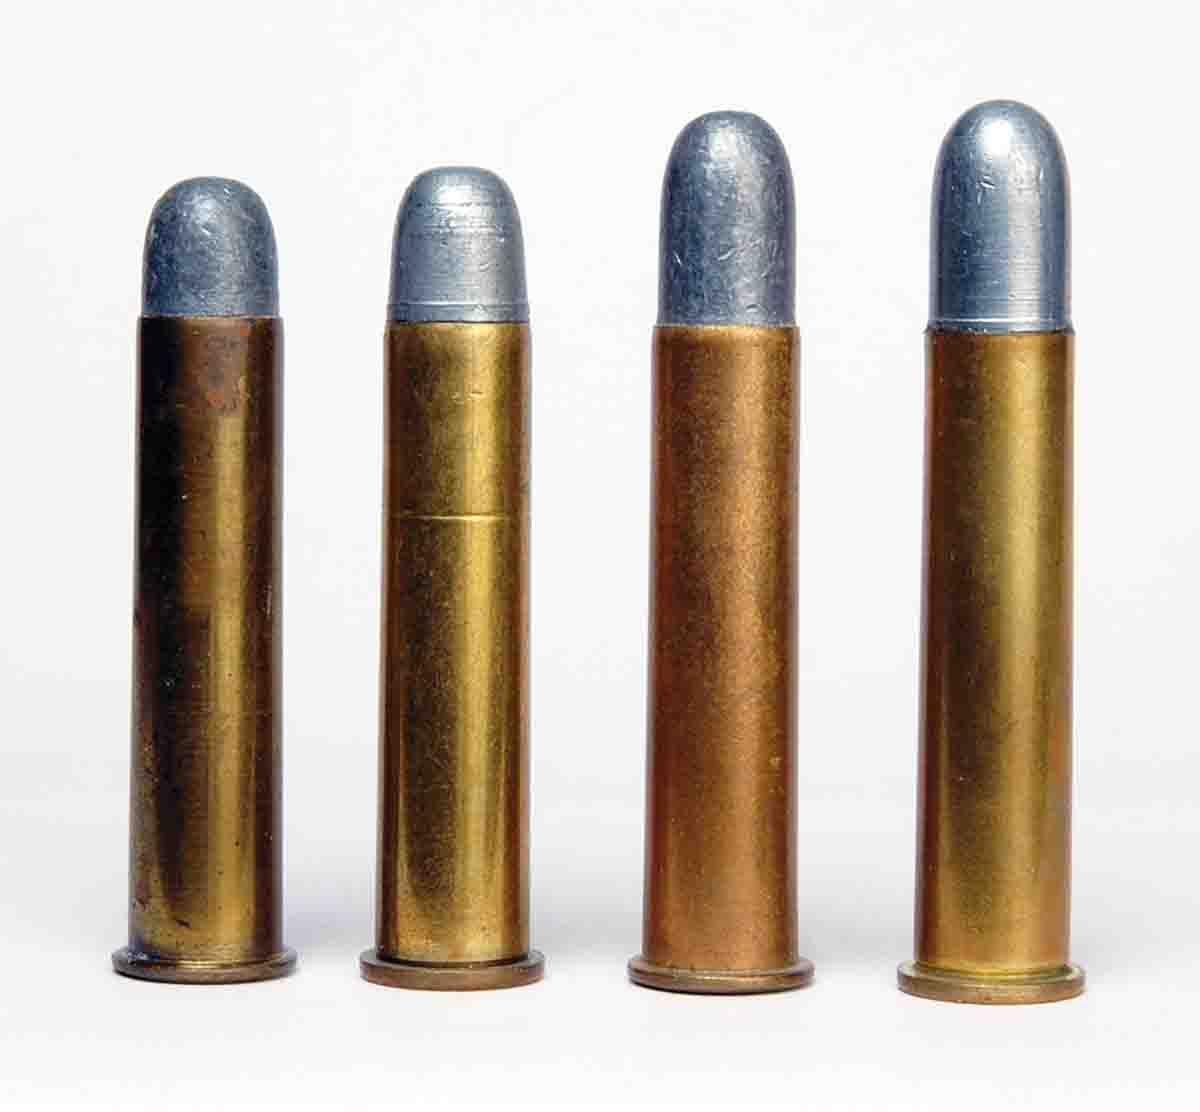 Cartridges shown (left to right) include a late 1800s .45 Government load with a 405-grain bullet, Mike’s duplication using a Lyman No. 457124 bullet, a late 1800s .45 Government with a 500-grain bullet and a duplication load with a Lyman No. 457125 bullet.